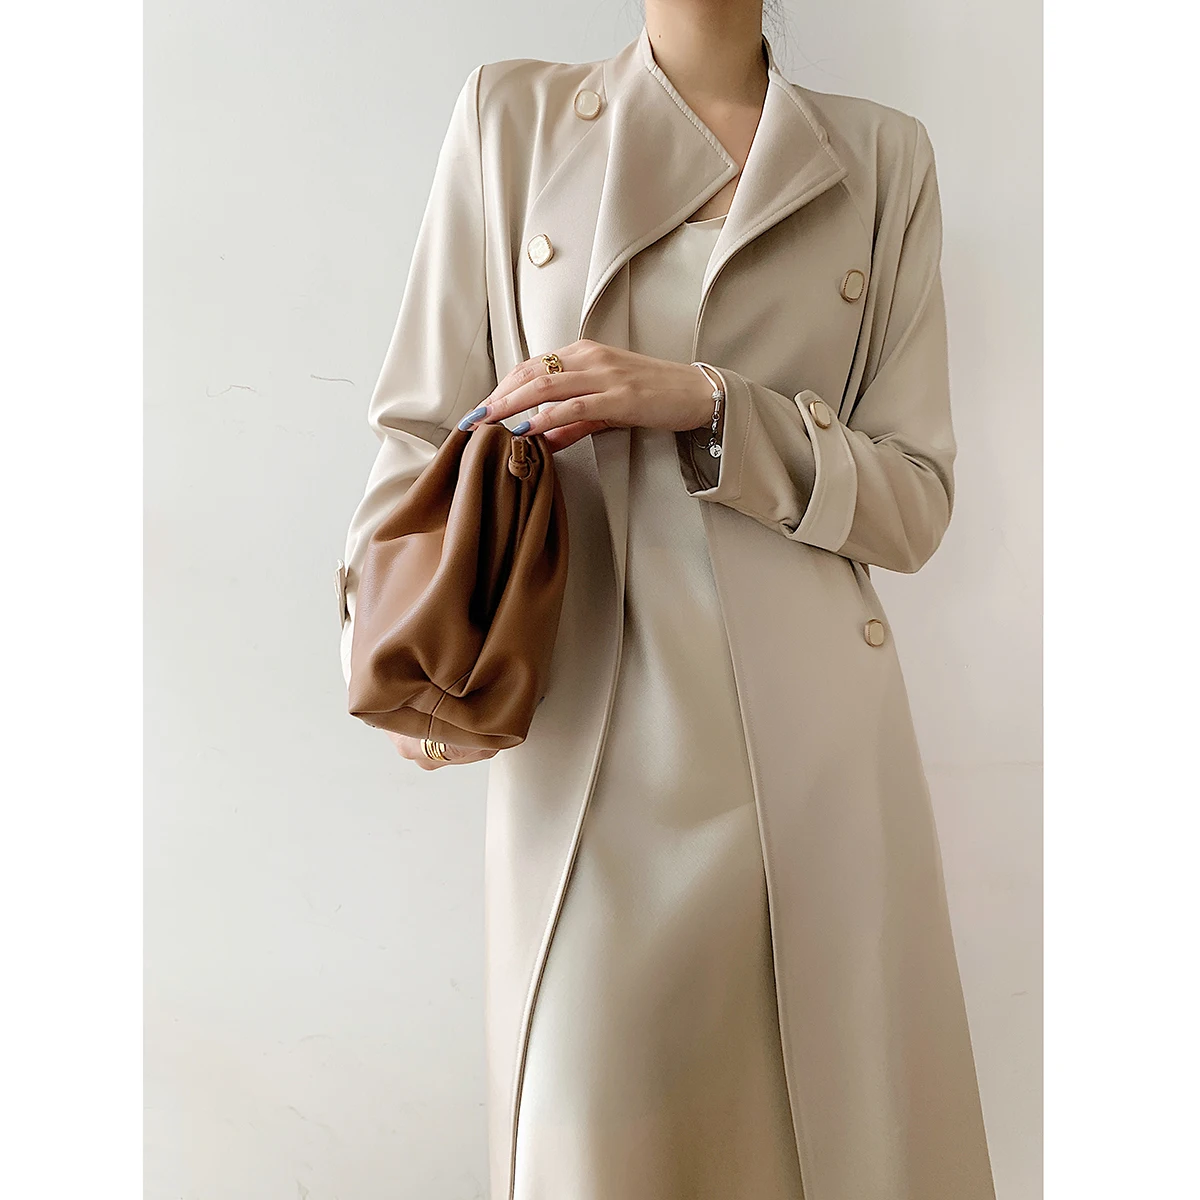 

Beige Trench Coat Women's Spring and Autumn Mid Long 2021 New Thin High End Acetic Acid Satin Temperament Spring Fashion